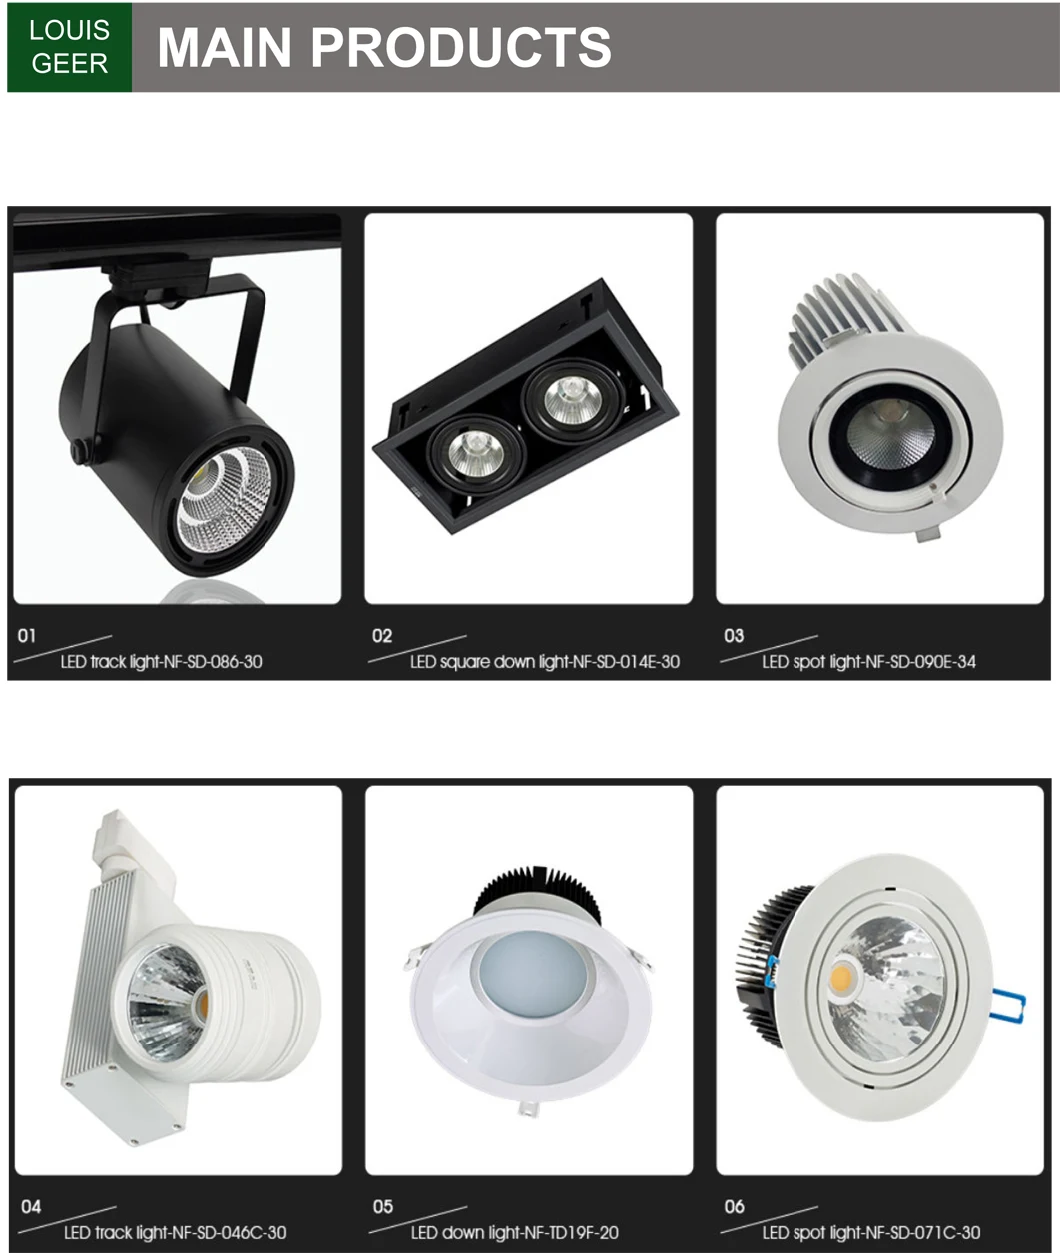 Integrated Retractable Die-Casting Aluminum LED Down Light Fixtures Ultra Thin LED Down Light